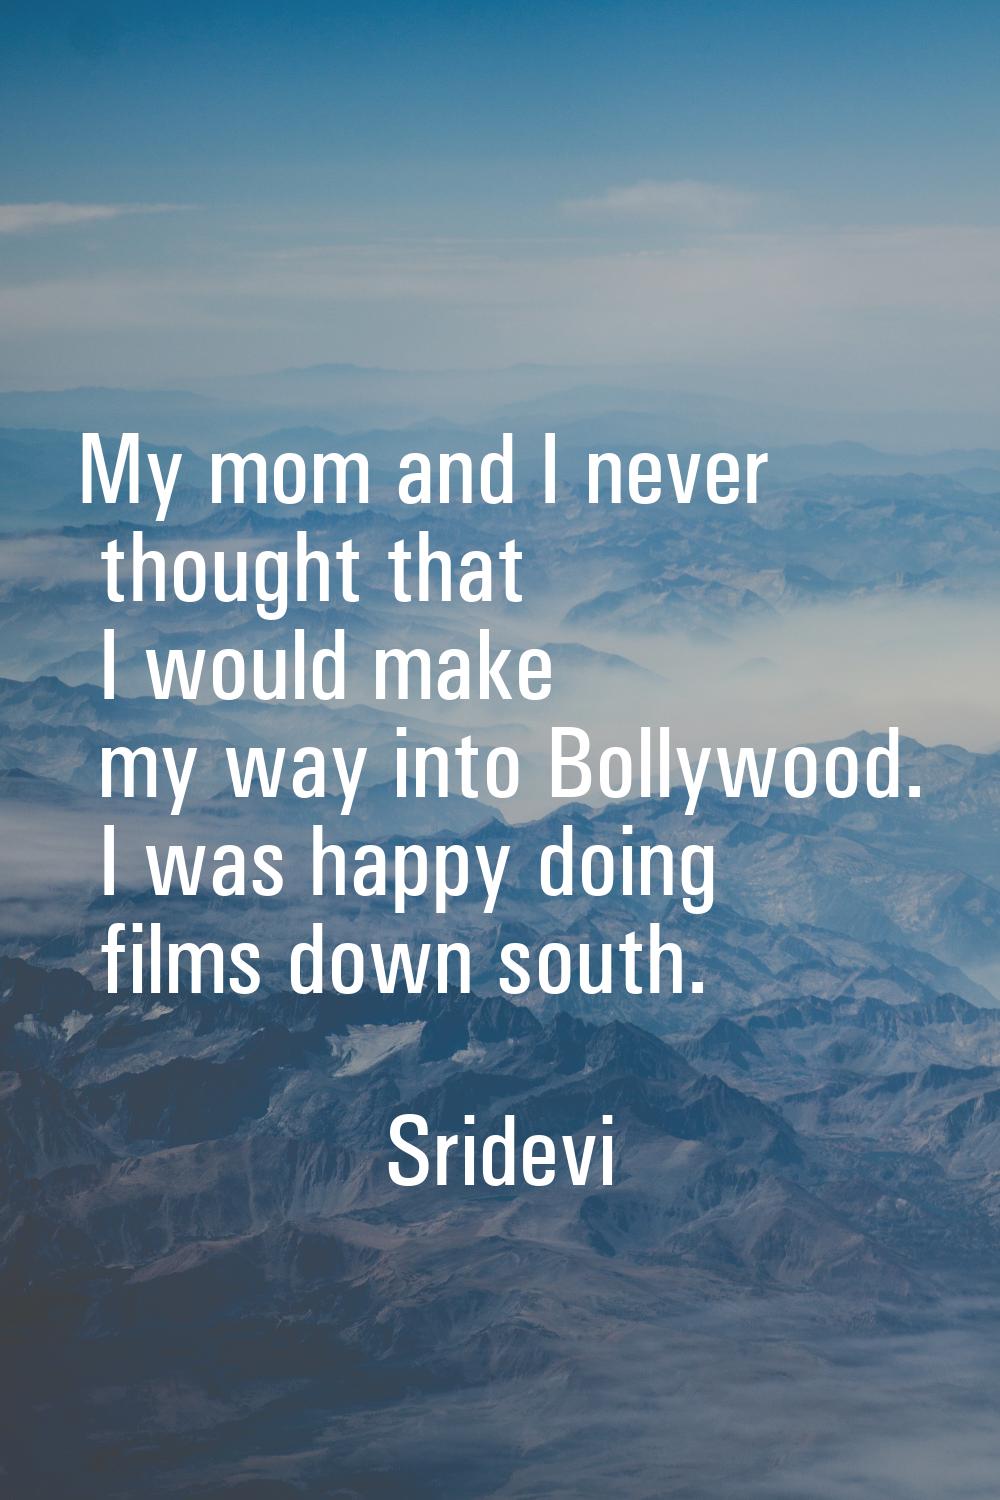 My mom and I never thought that I would make my way into Bollywood. I was happy doing films down so